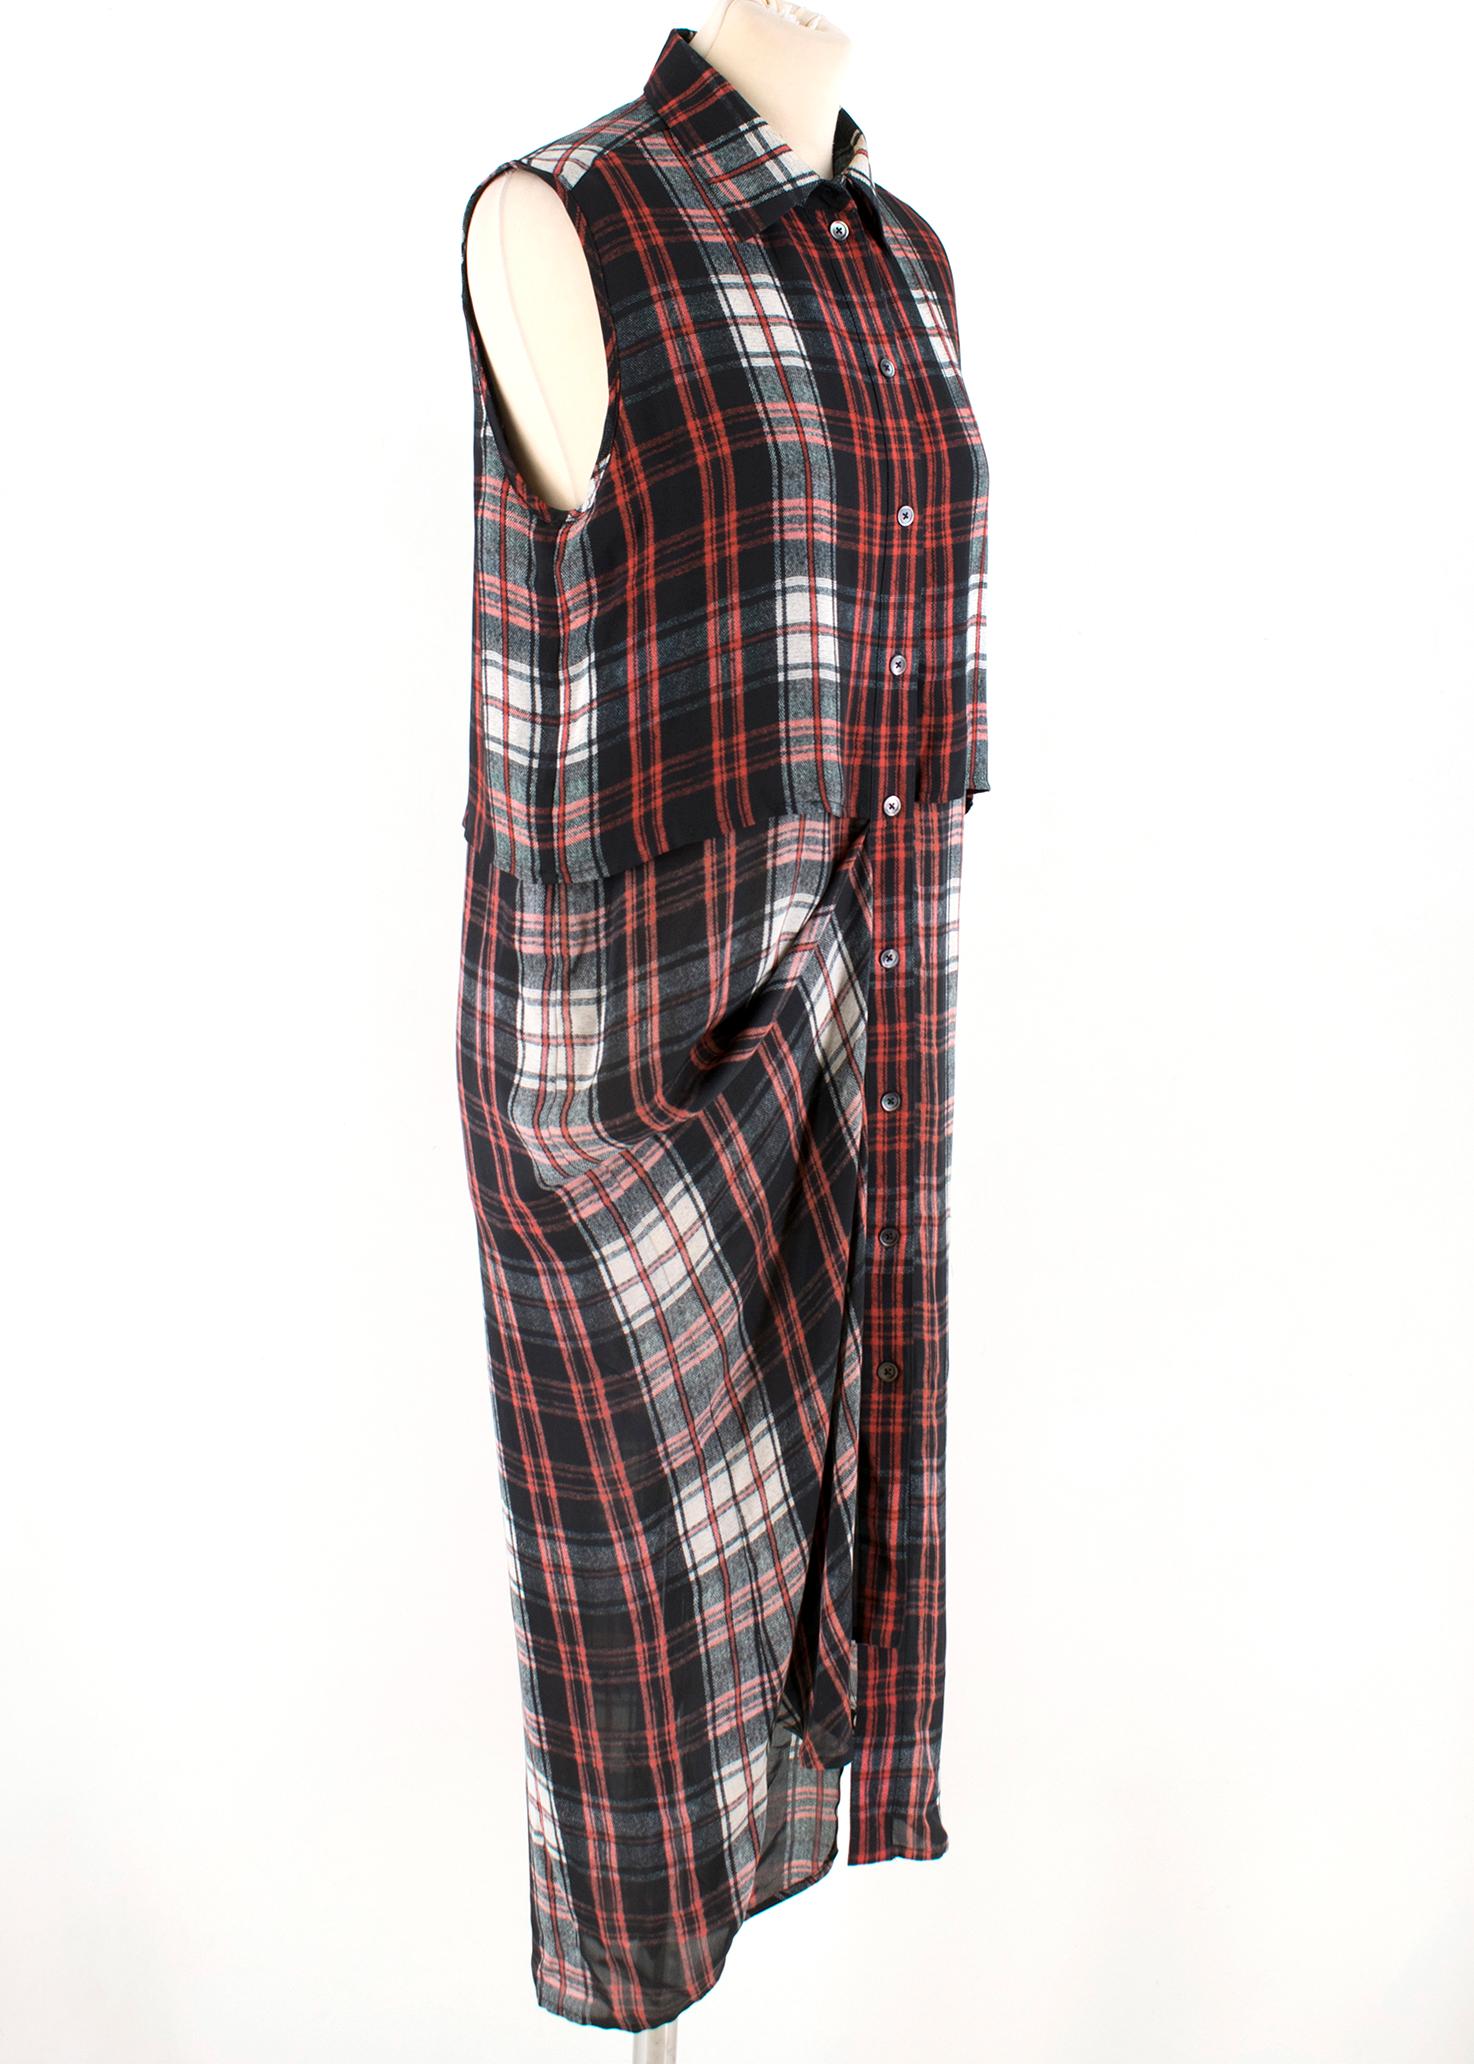 McQ Tartan Double Layer Shirtdress

A cropped overlay bodice creates easy layers on this plaid silk McQ - Alexander McQueen shirtdress. A draped gather subtly shapes the silhouette. Button placket. Sleeveless. Unlined.

Please note, these items are